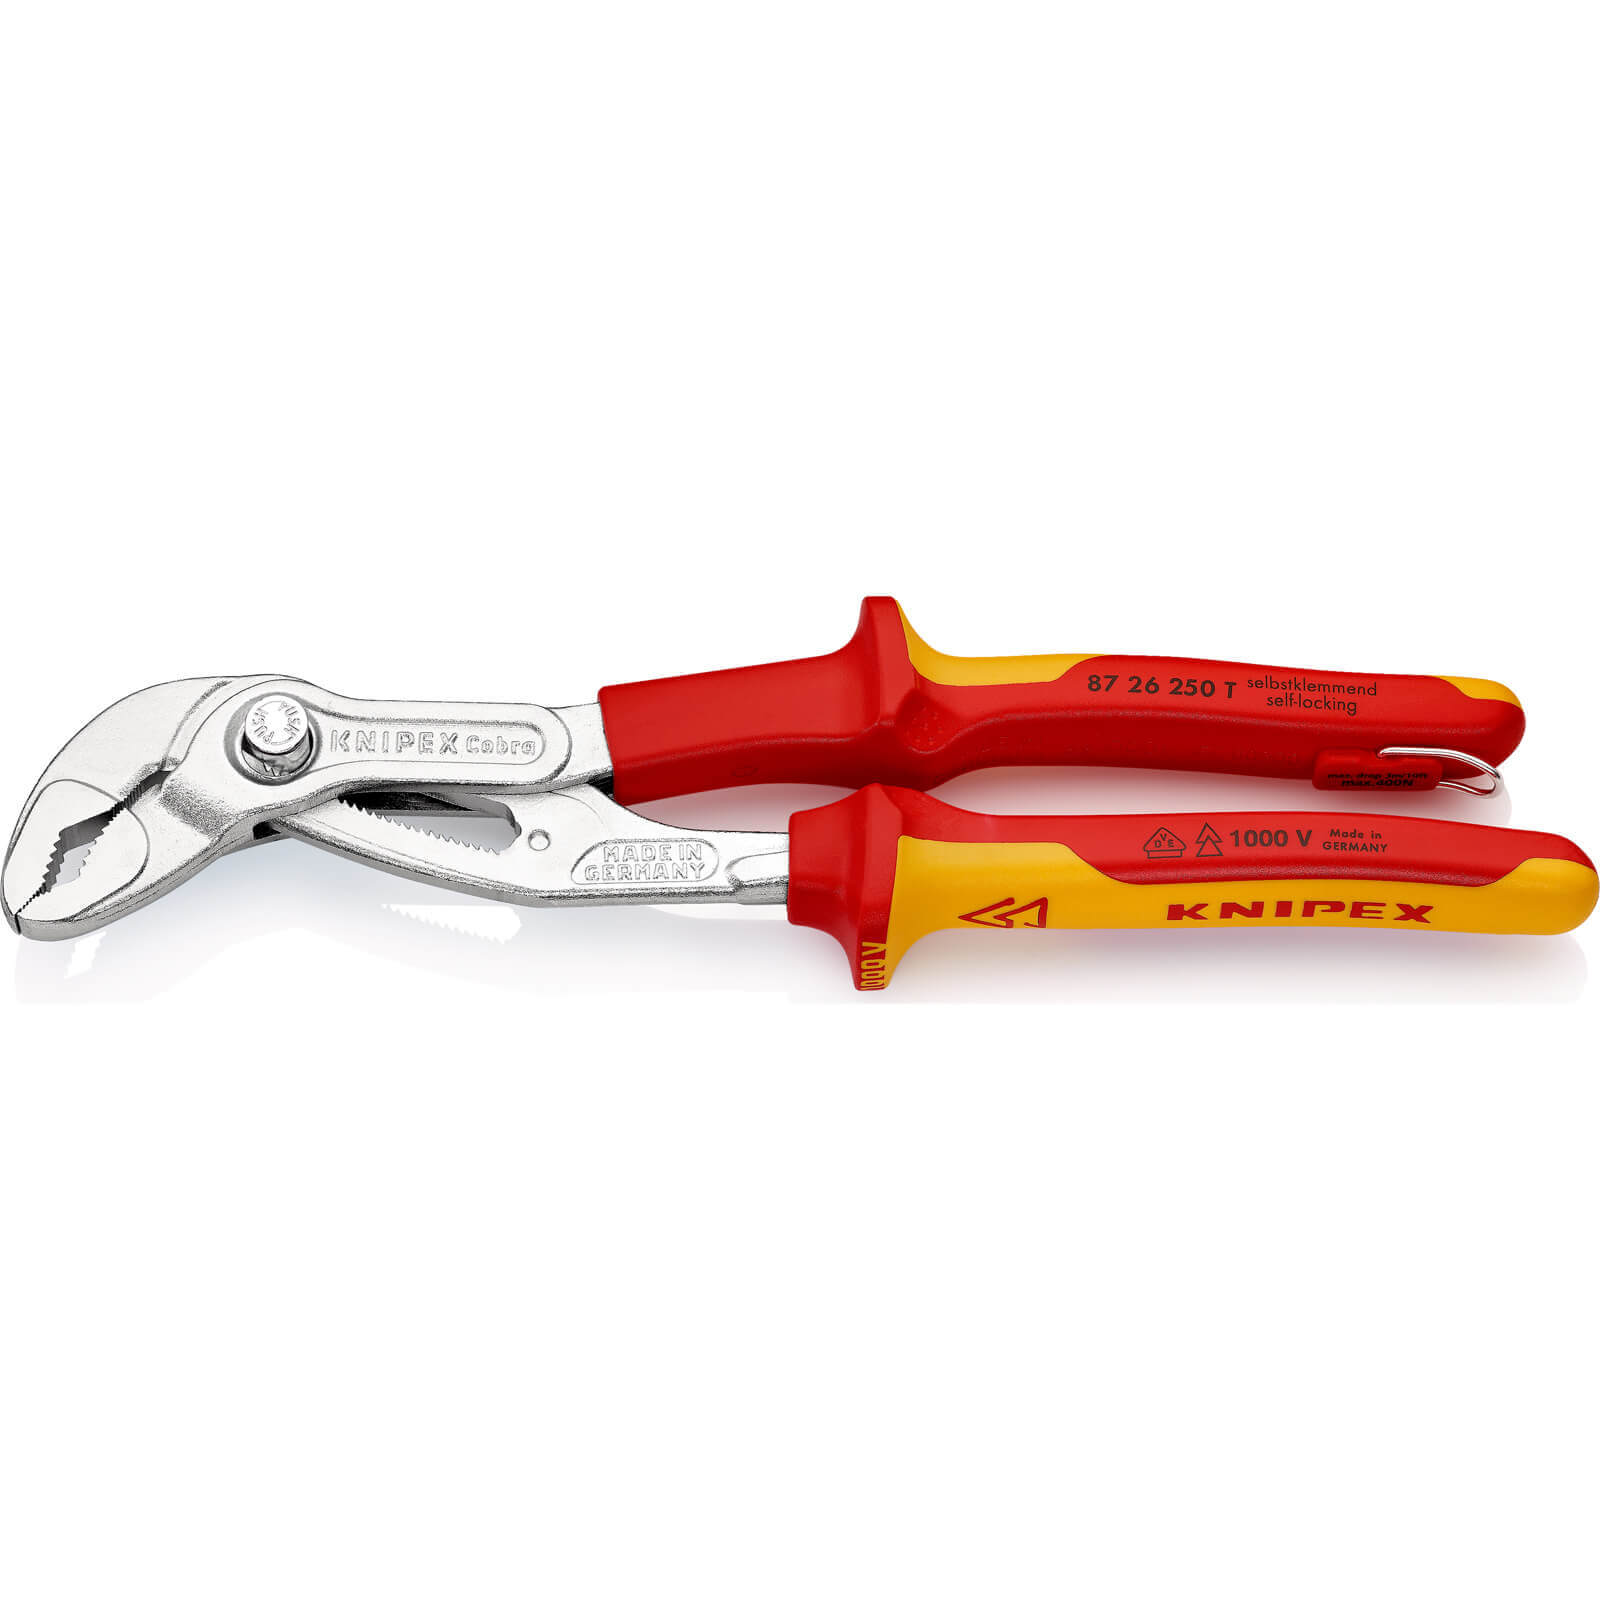 Image of Knipex 87 26 VDE Insulated Cobra Hightech Tethered Water Pump Pliers 250mm